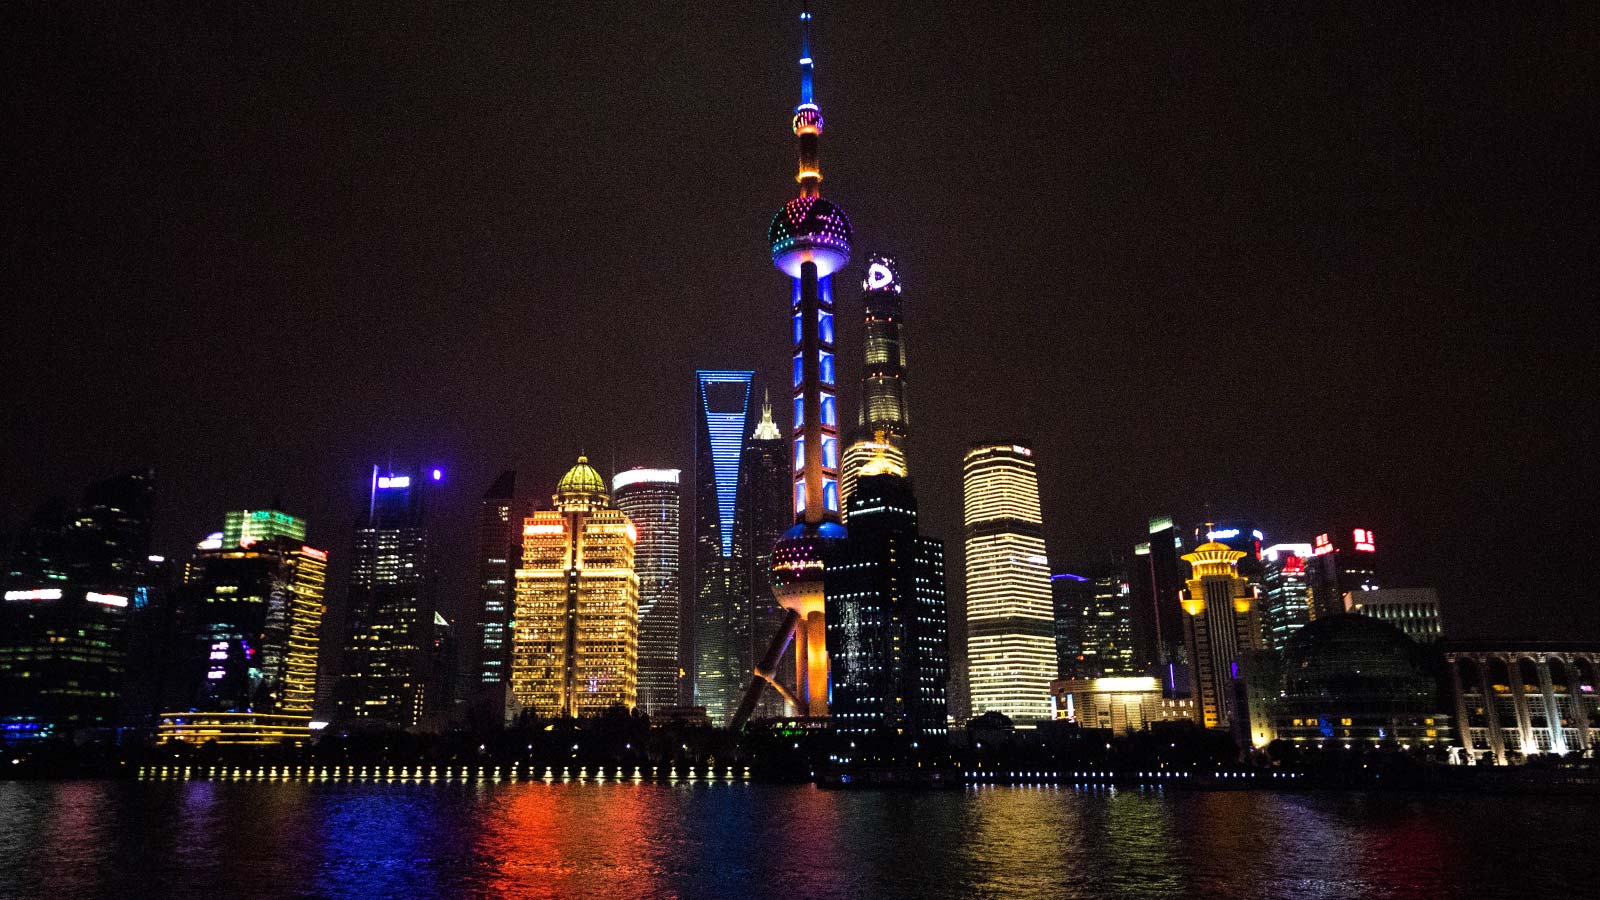 Airport layovers can be a major hassle. But during our 24-hour layover in Shanghai China, we decided to make the best of it and see how many things to do in Shanghai that we could pack into our schedule. It turns out that we could do in WAY more than we expected.